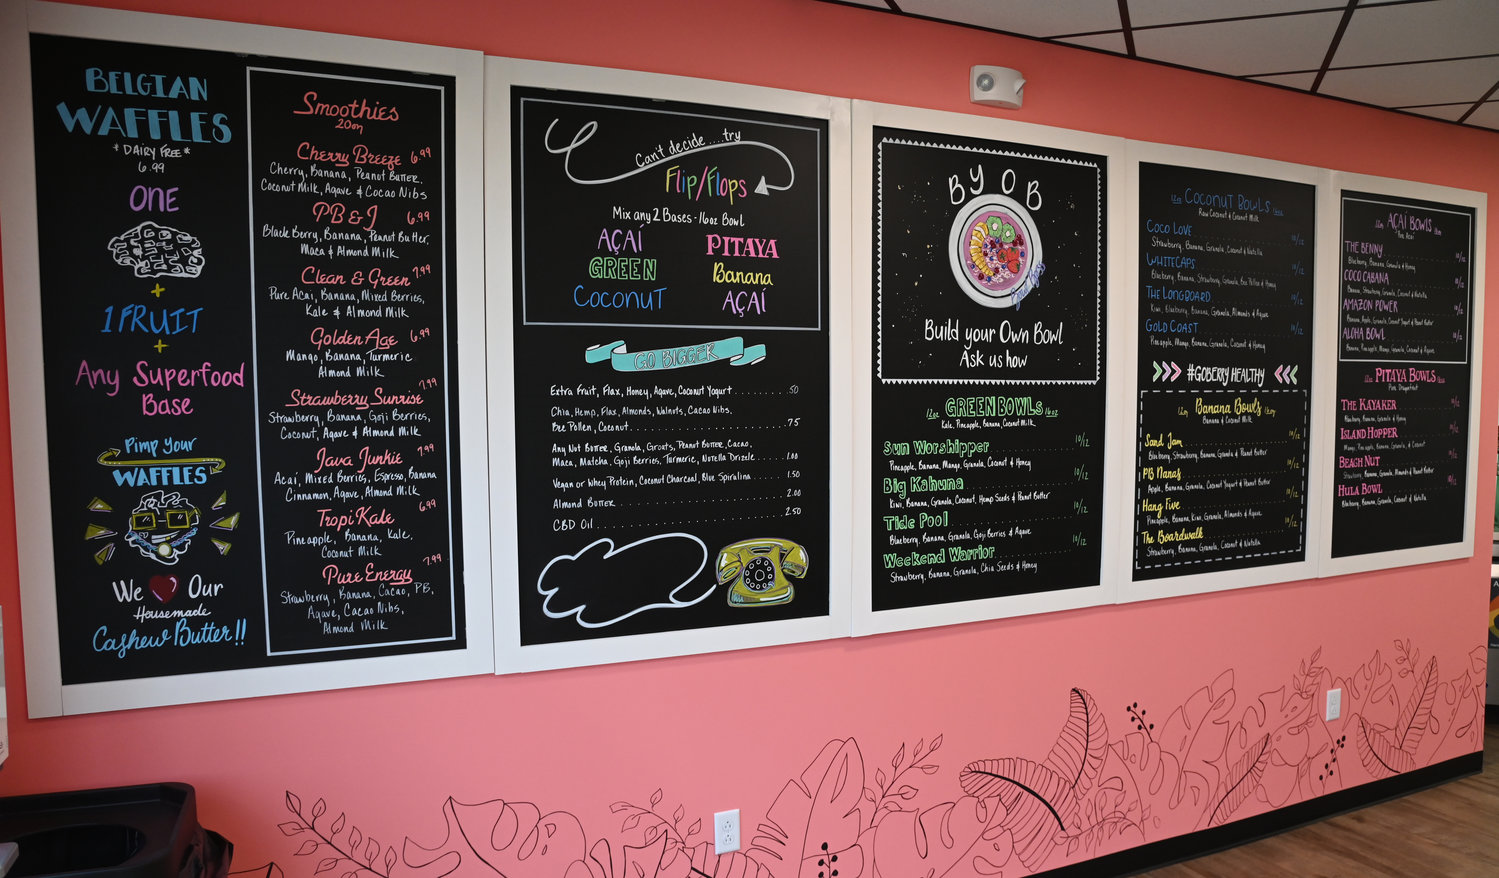 ON THE MENU — The Bowl Boss, 86 Hangar Road, features an array of items from smoothies to waffles to specialty bowls as well as a "Build Your Own Bowl" option.